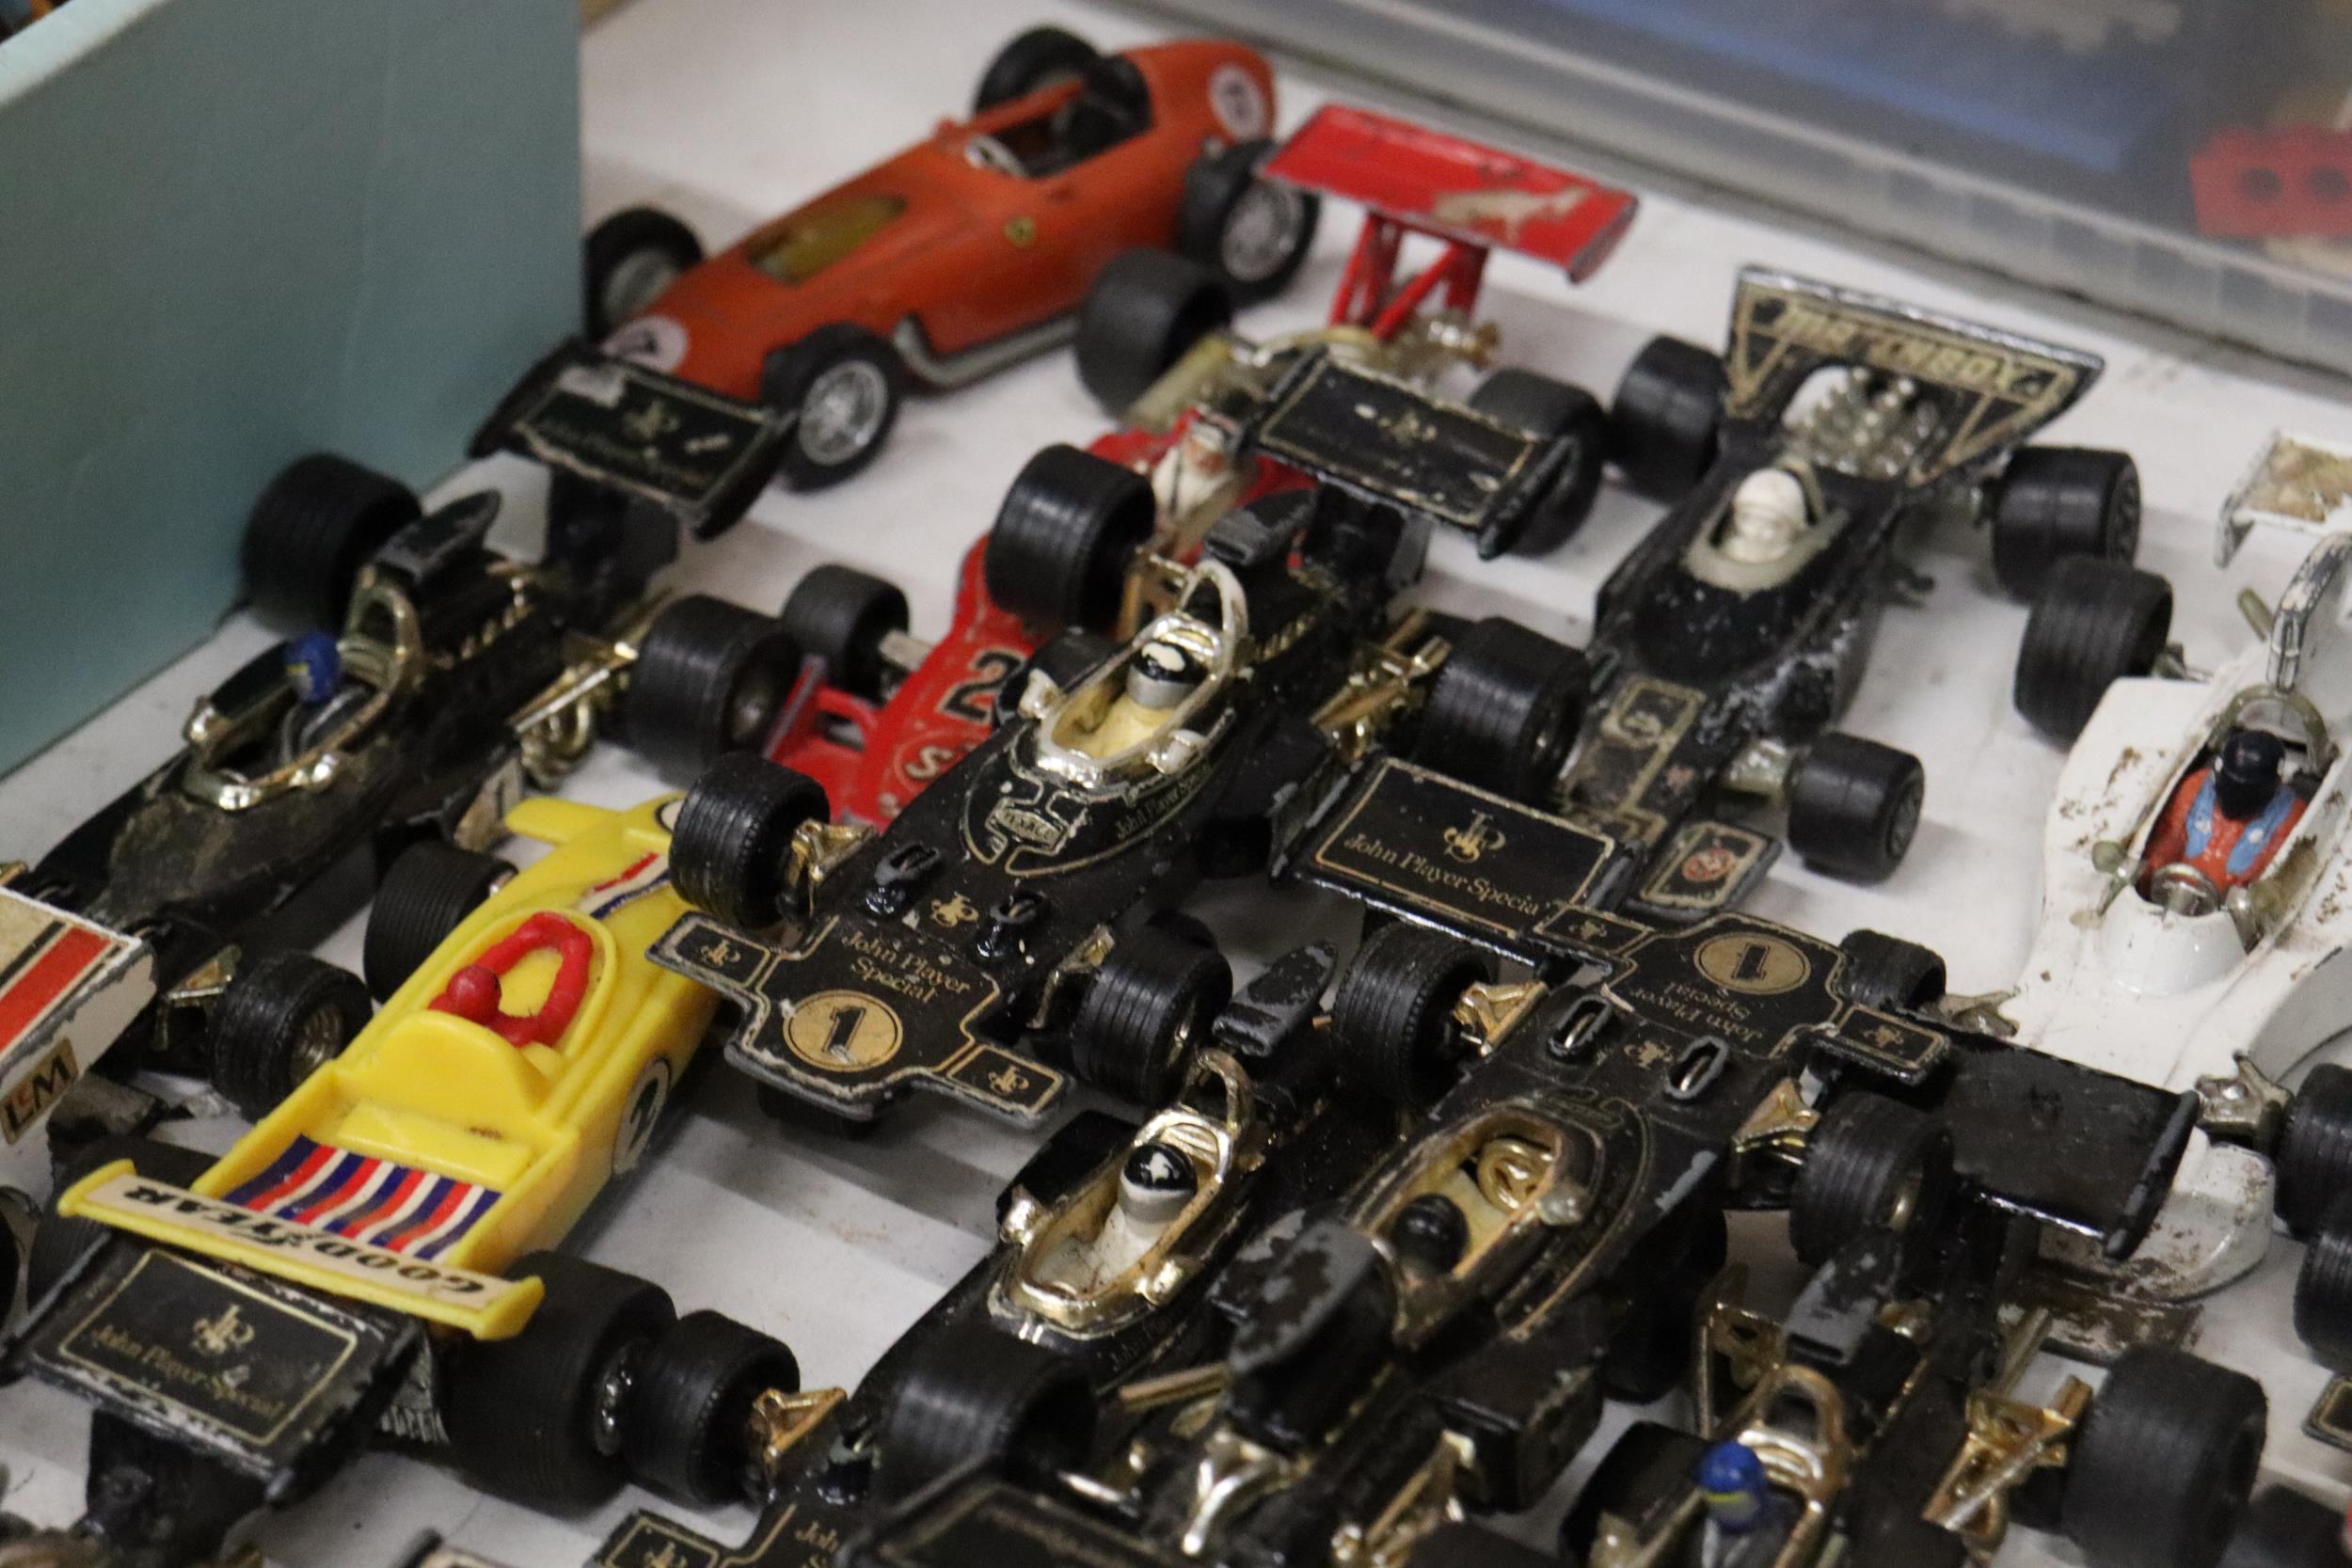 A LARGE QUANTITY OF VINTAGE DIE-CAST CORGI AND MATCHBOX F1 RACING CARS - Image 4 of 9